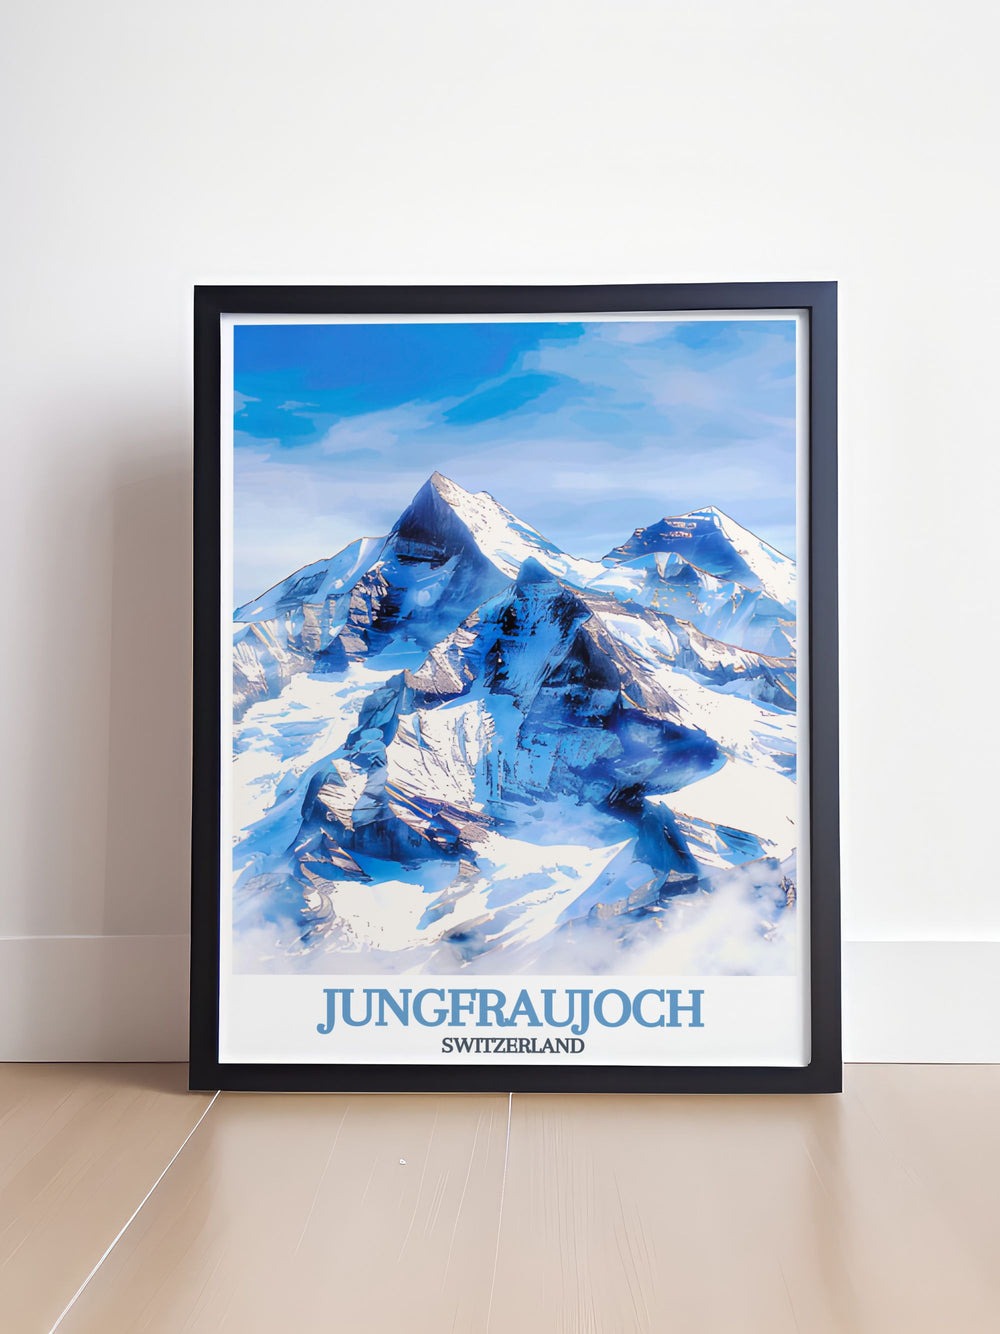 This Switzerland print showcases the expansive beauty of the Aletsch Glacier as seen from Jungfraujoch, capturing the serene and majestic alpine landscape. The intricate details and vibrant hues make this a standout piece for home decor or as a thoughtful gift for travelers.